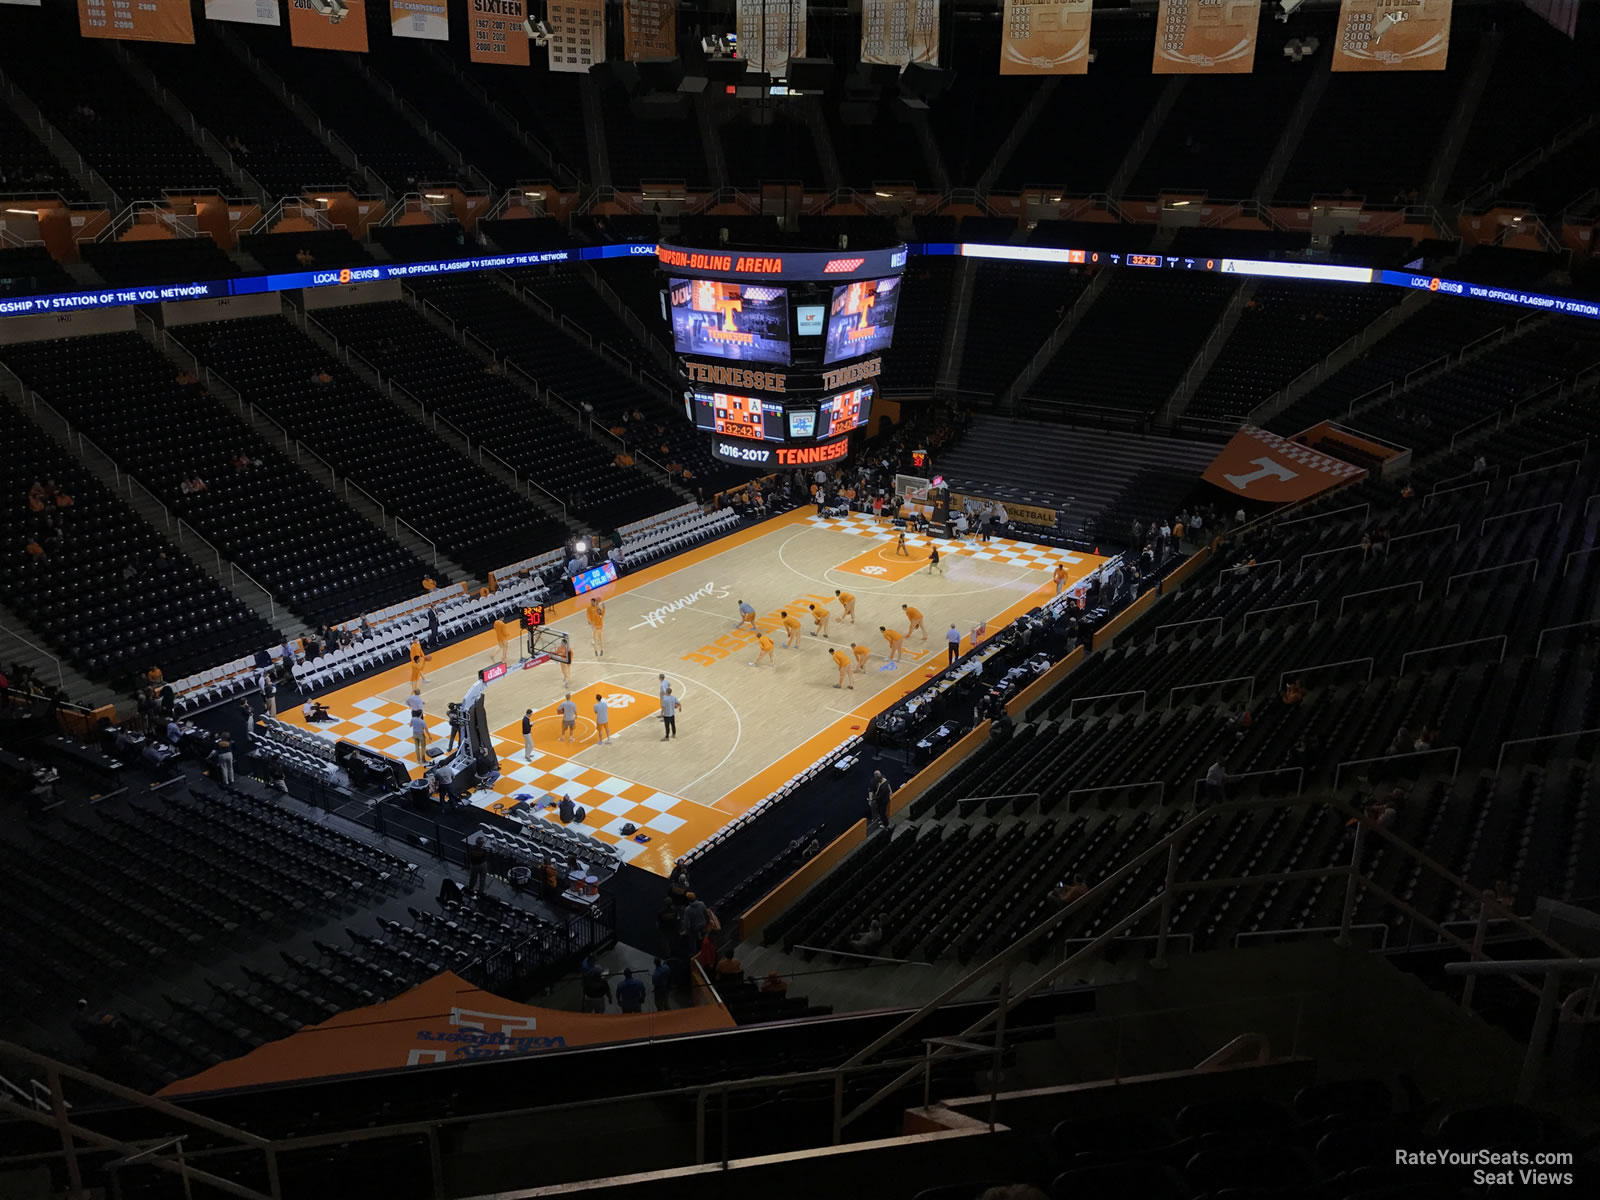 Thompson Boling Arena Seating Chart With Row Numbers